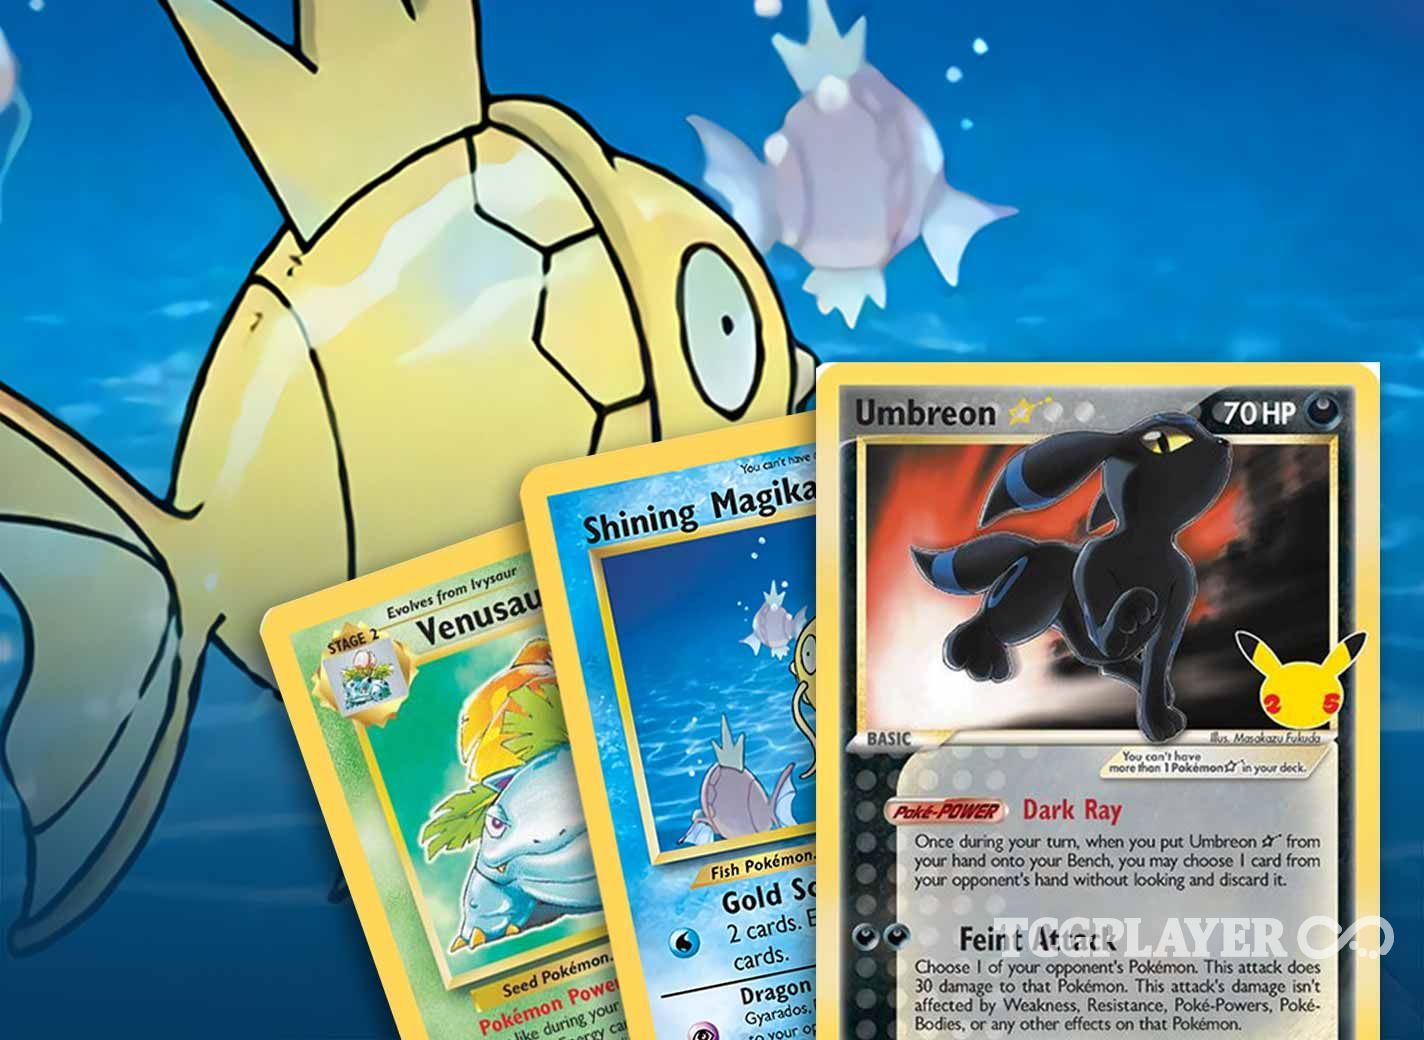 https://mktg-assets.tcgplayer.com/filters:watermark(tcgplayer-cdn-prd,infinite-watermark.png,-30,-80,40)//content/pokemon/10_21/12/C-10-12-2021-PKM-The%2010%20Most%20Valuable%20Pokemon%20Cards%20in%20Celebrations-OG@2x.jpg